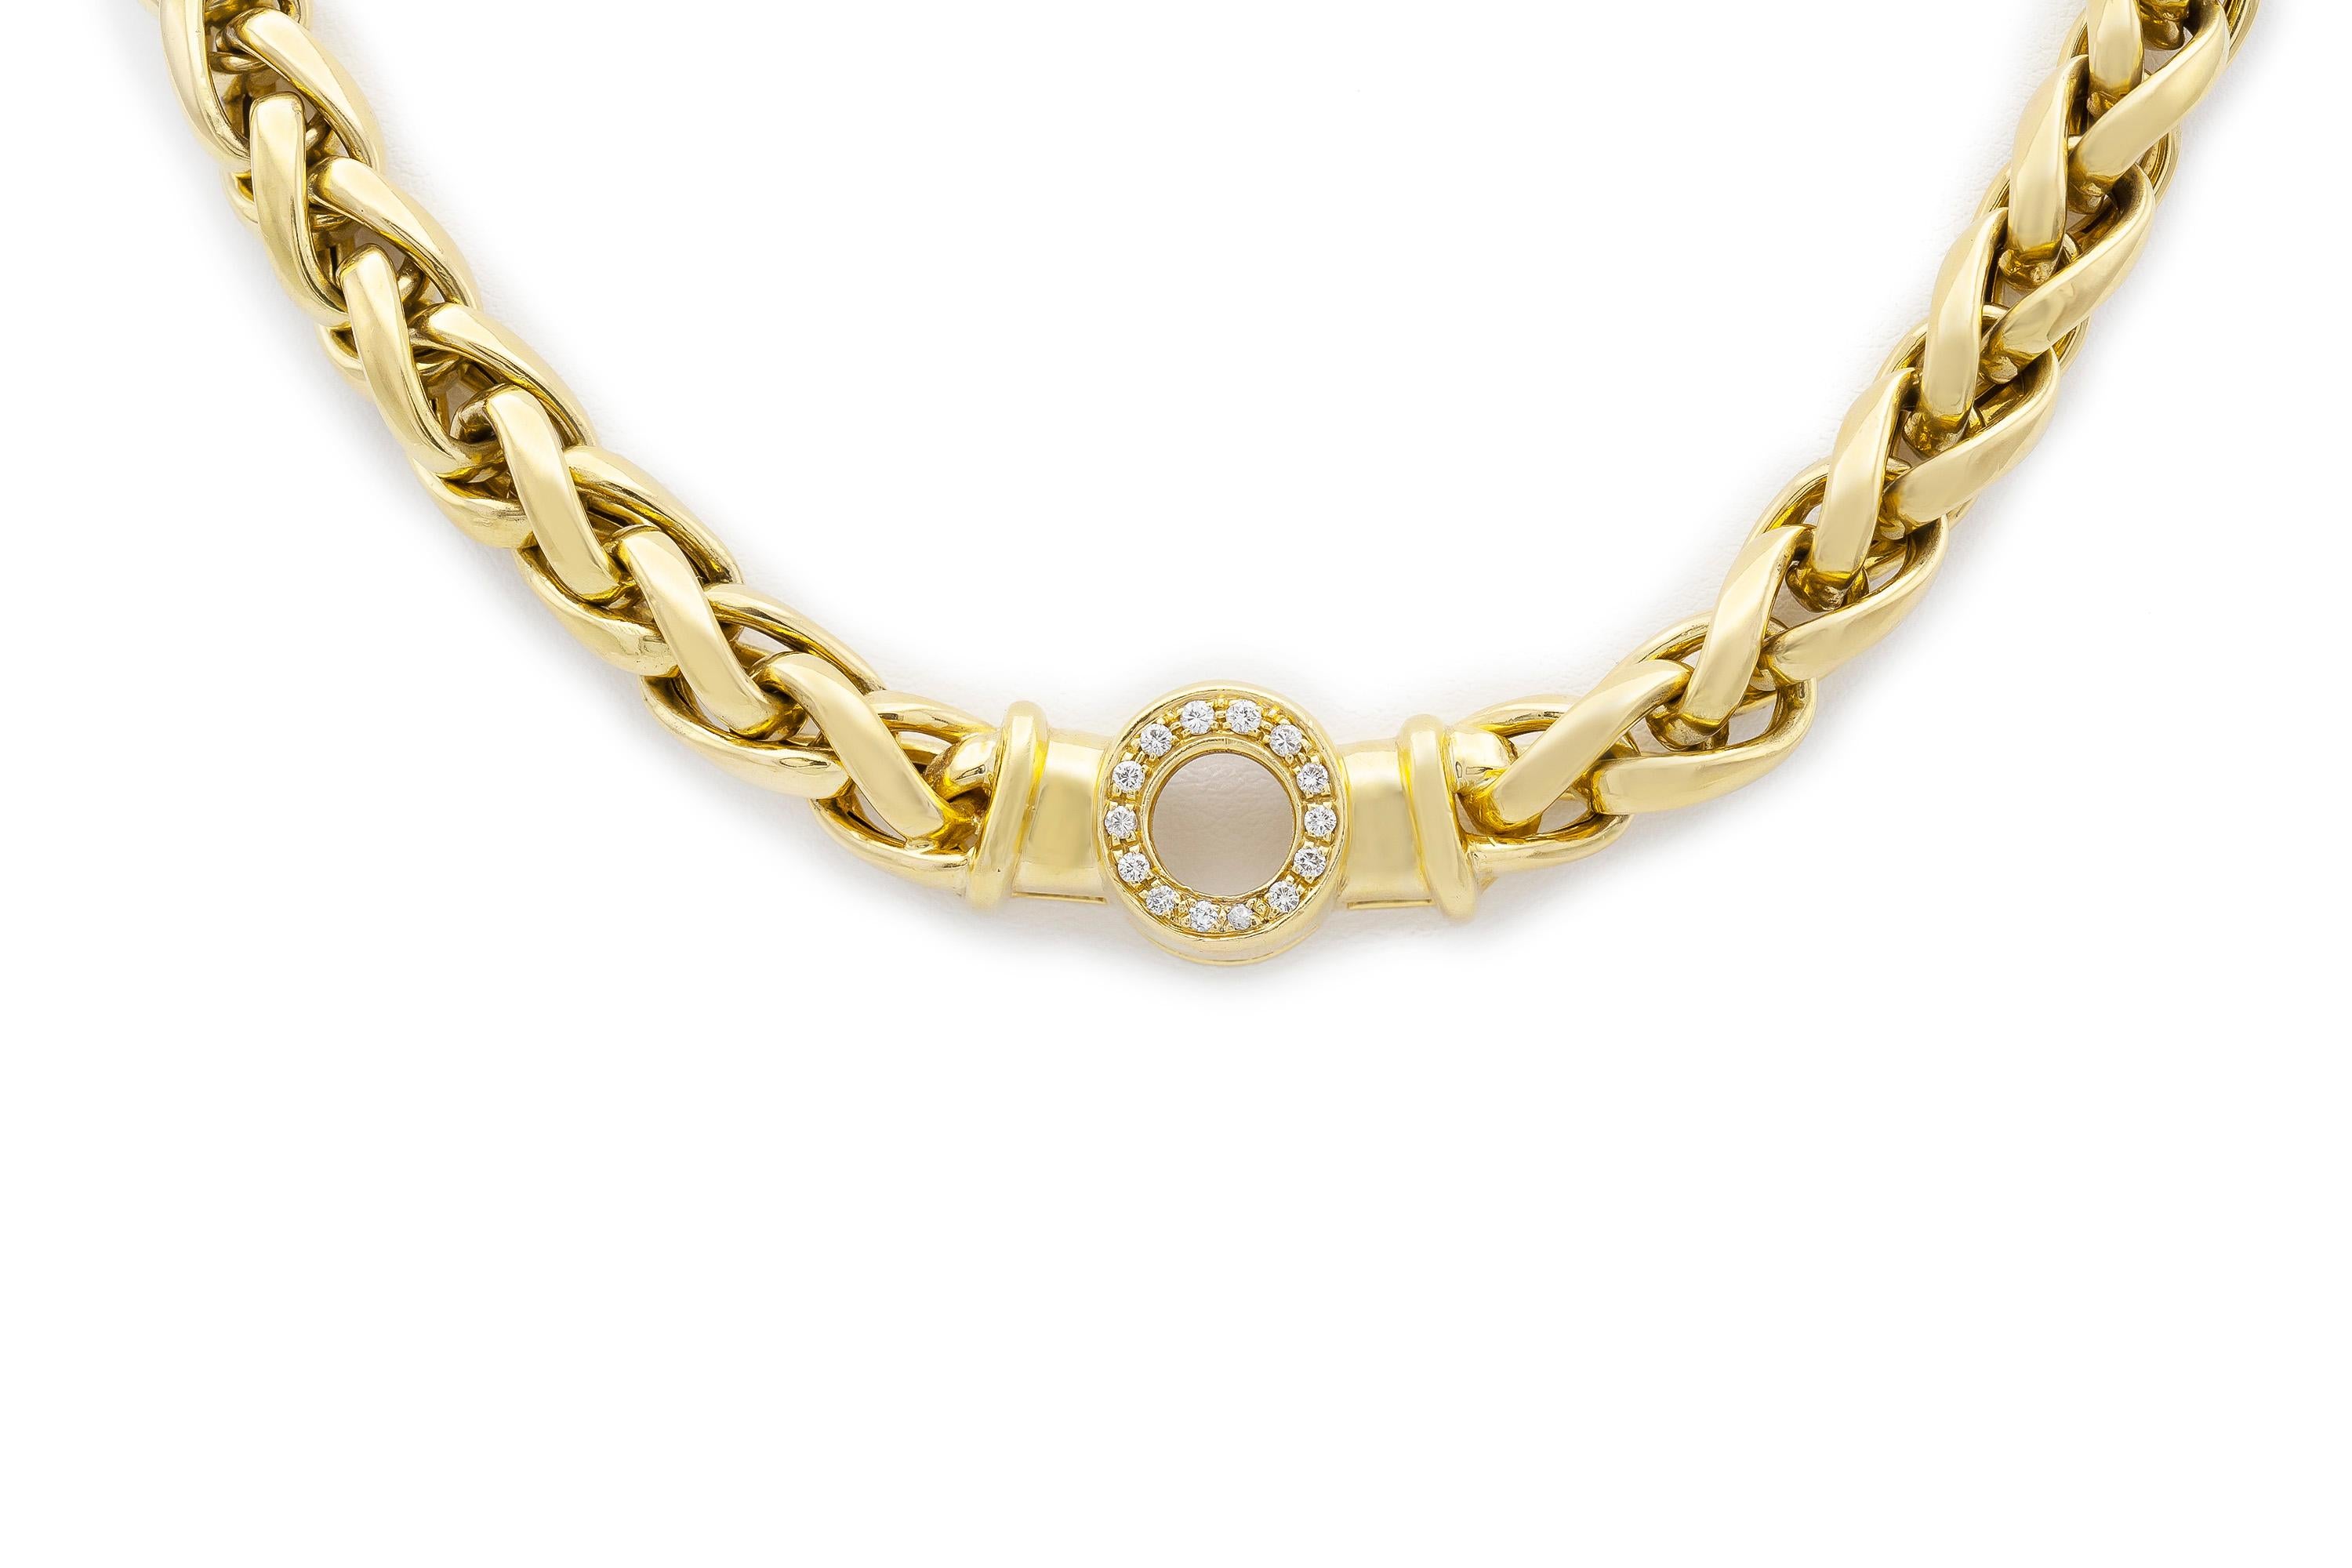 Necklace finely crafted in 18 karats yellow gold, with diamonds weighing 0.56 carats.
17 3/4 inches long, weighing 58.9 dwt. 